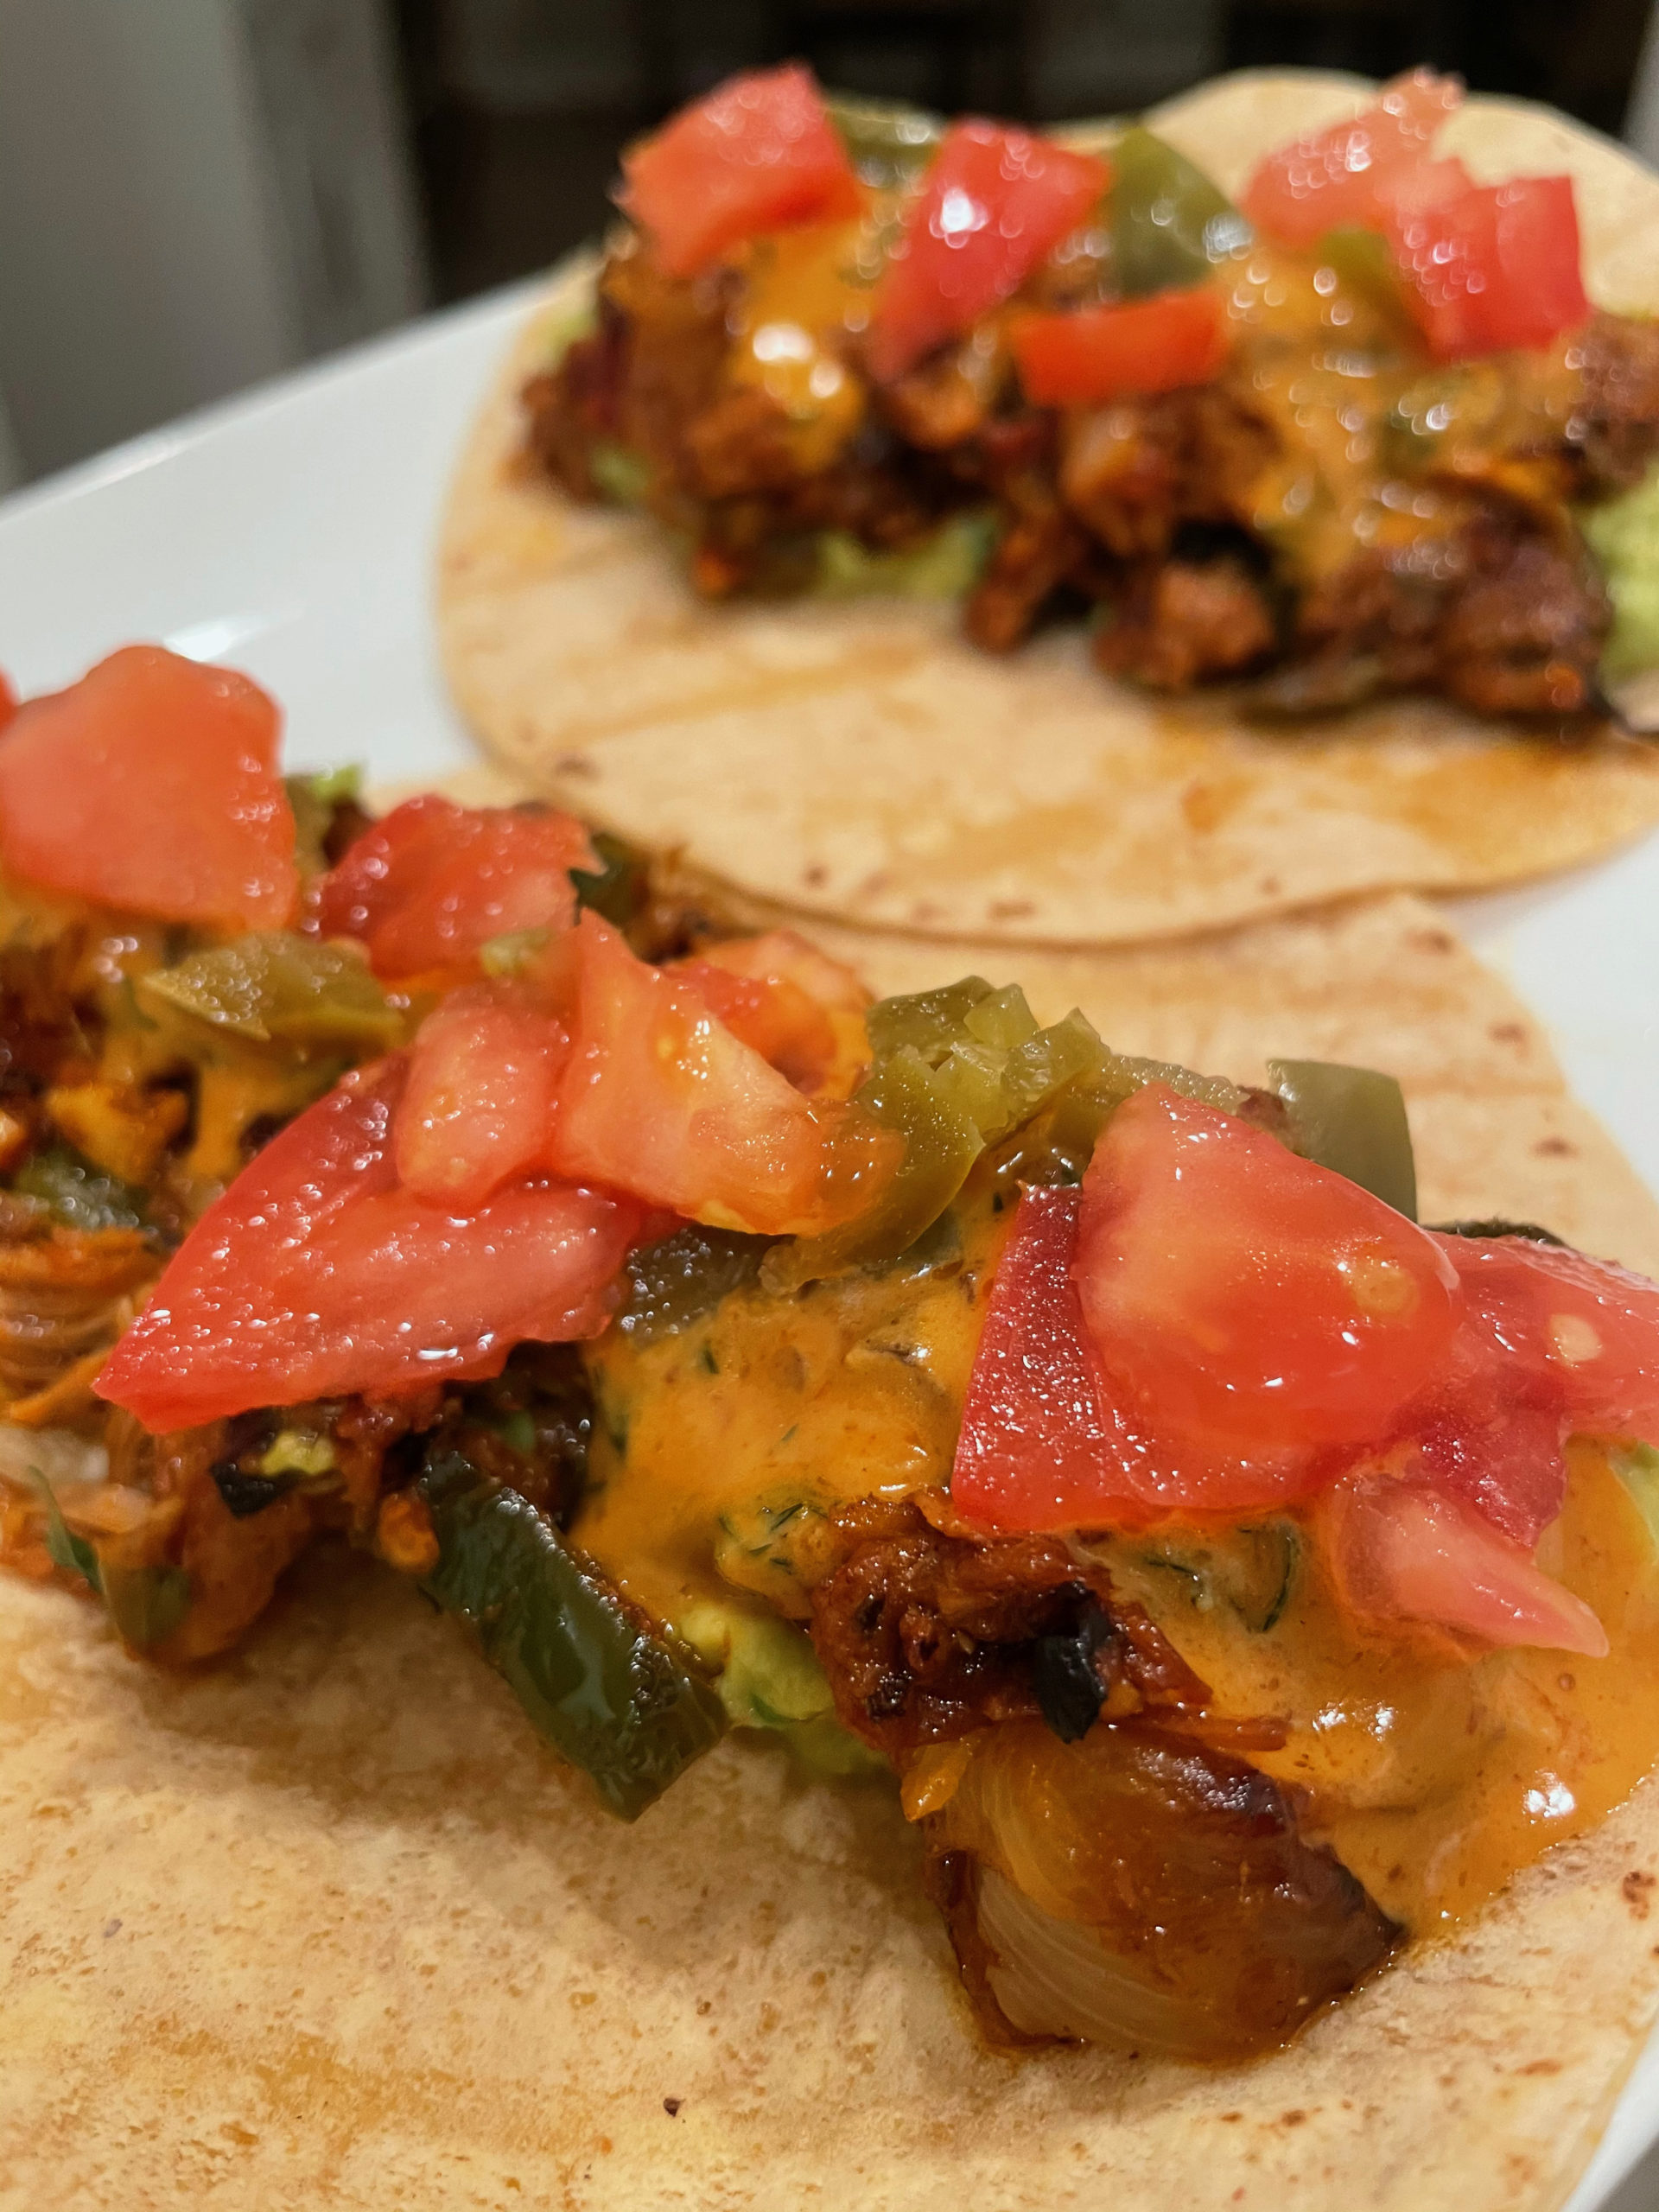 You can top your jackfruit tacos with tomatoes and a vegan chipotle aioli.